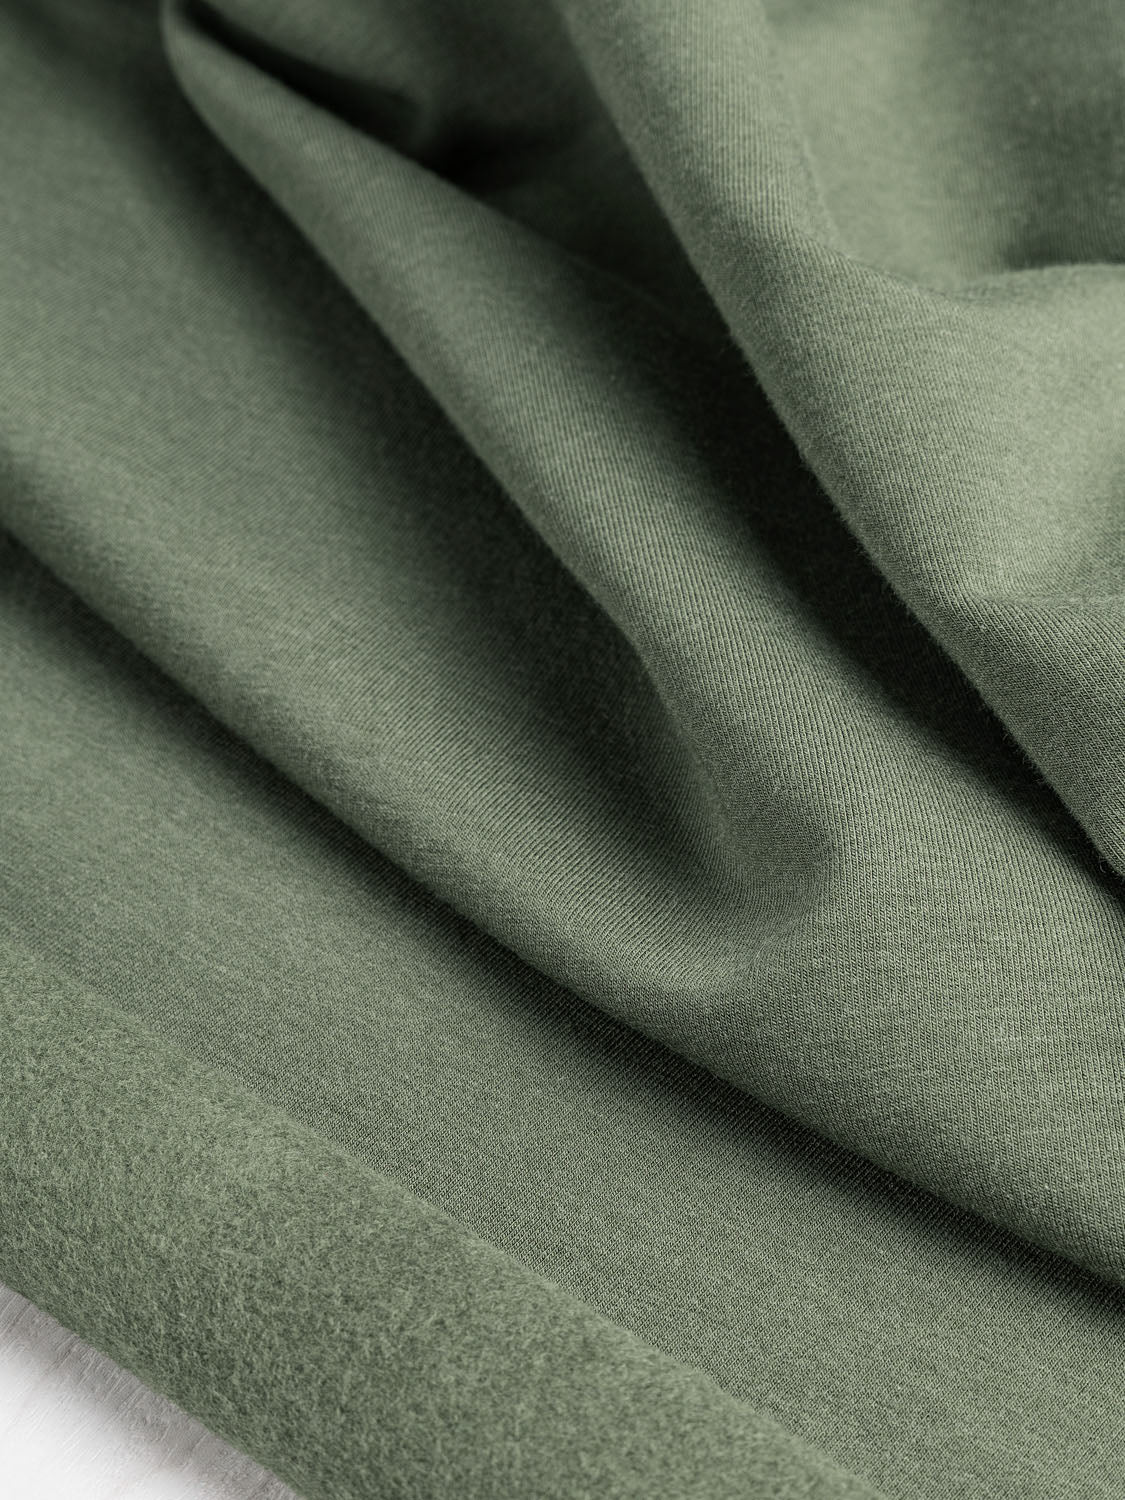 French Terry Brushed Fleece Fabric Heather Light Gray 60 Inch Width Poly  Rayon Cotton Sold by Half Yard or 1 Yard 